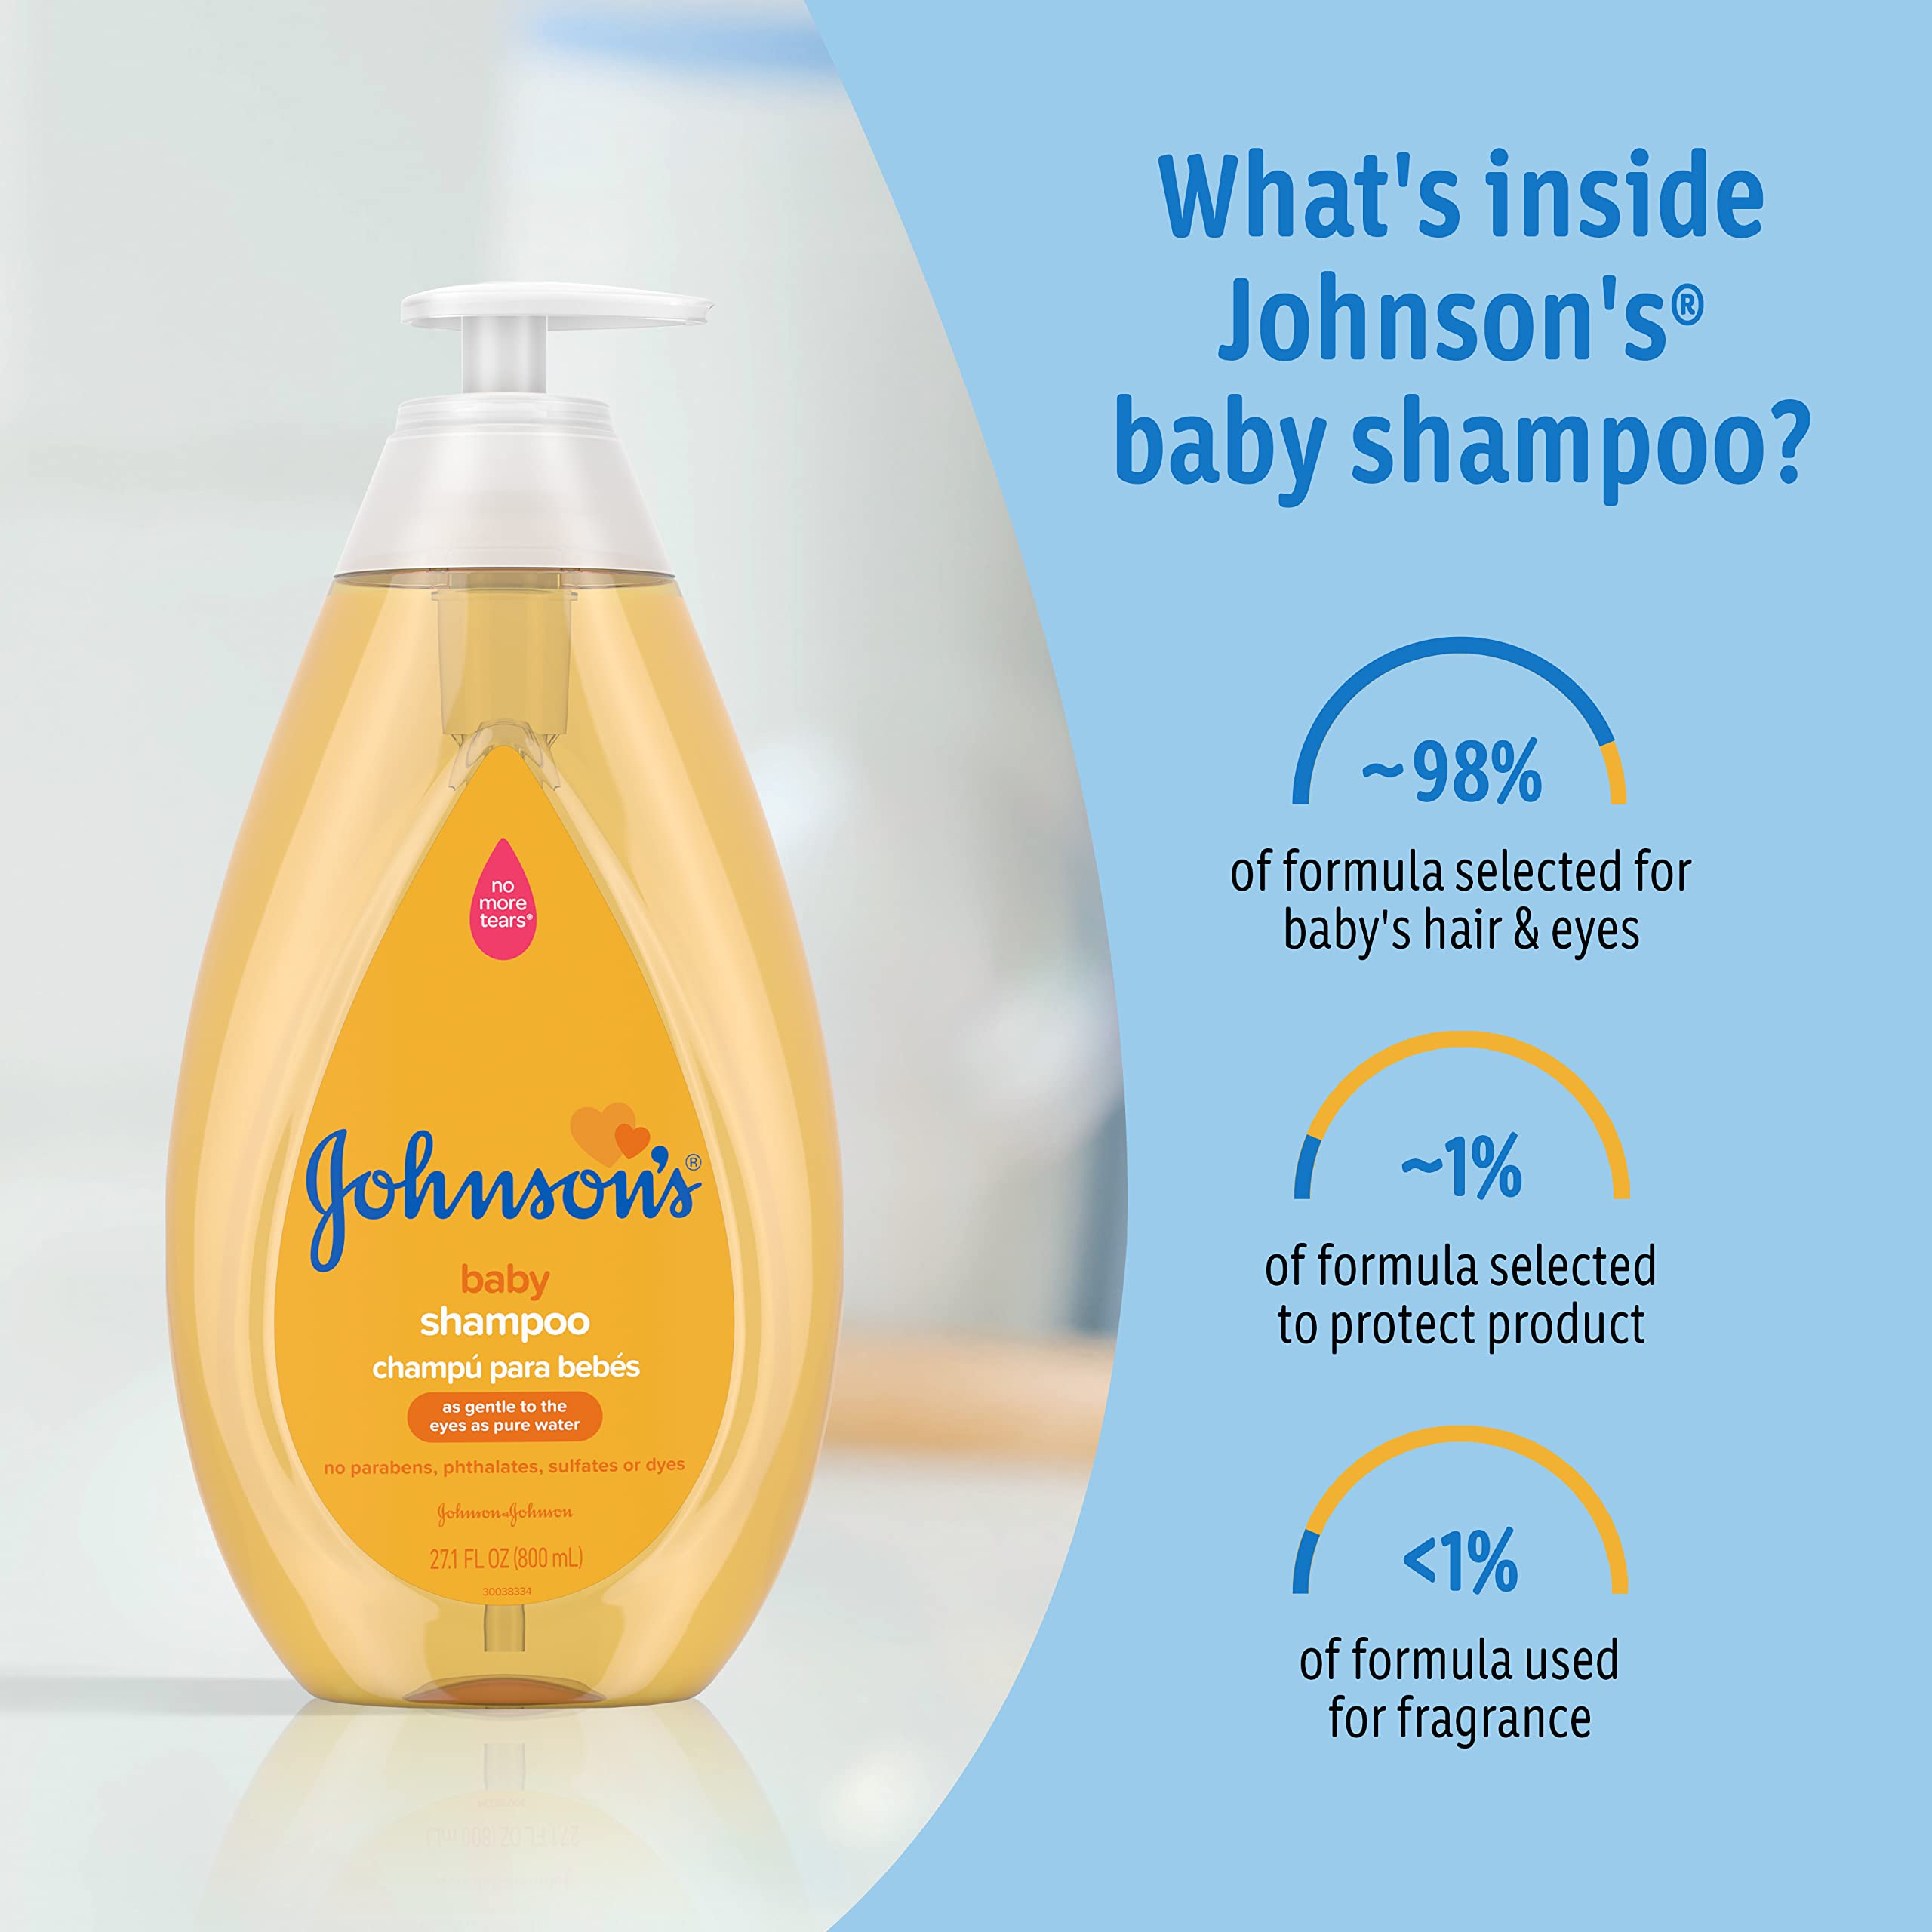 Johnson's Baby Shampoo with Tear-Free Formula, Shampoo for Baby's Delicate Scalp & Skin, Gently Washes Away Dirt & Germs, Paraben-, Phthalate-, Sulfate- & Dye-Free, 20.3 fl. oz